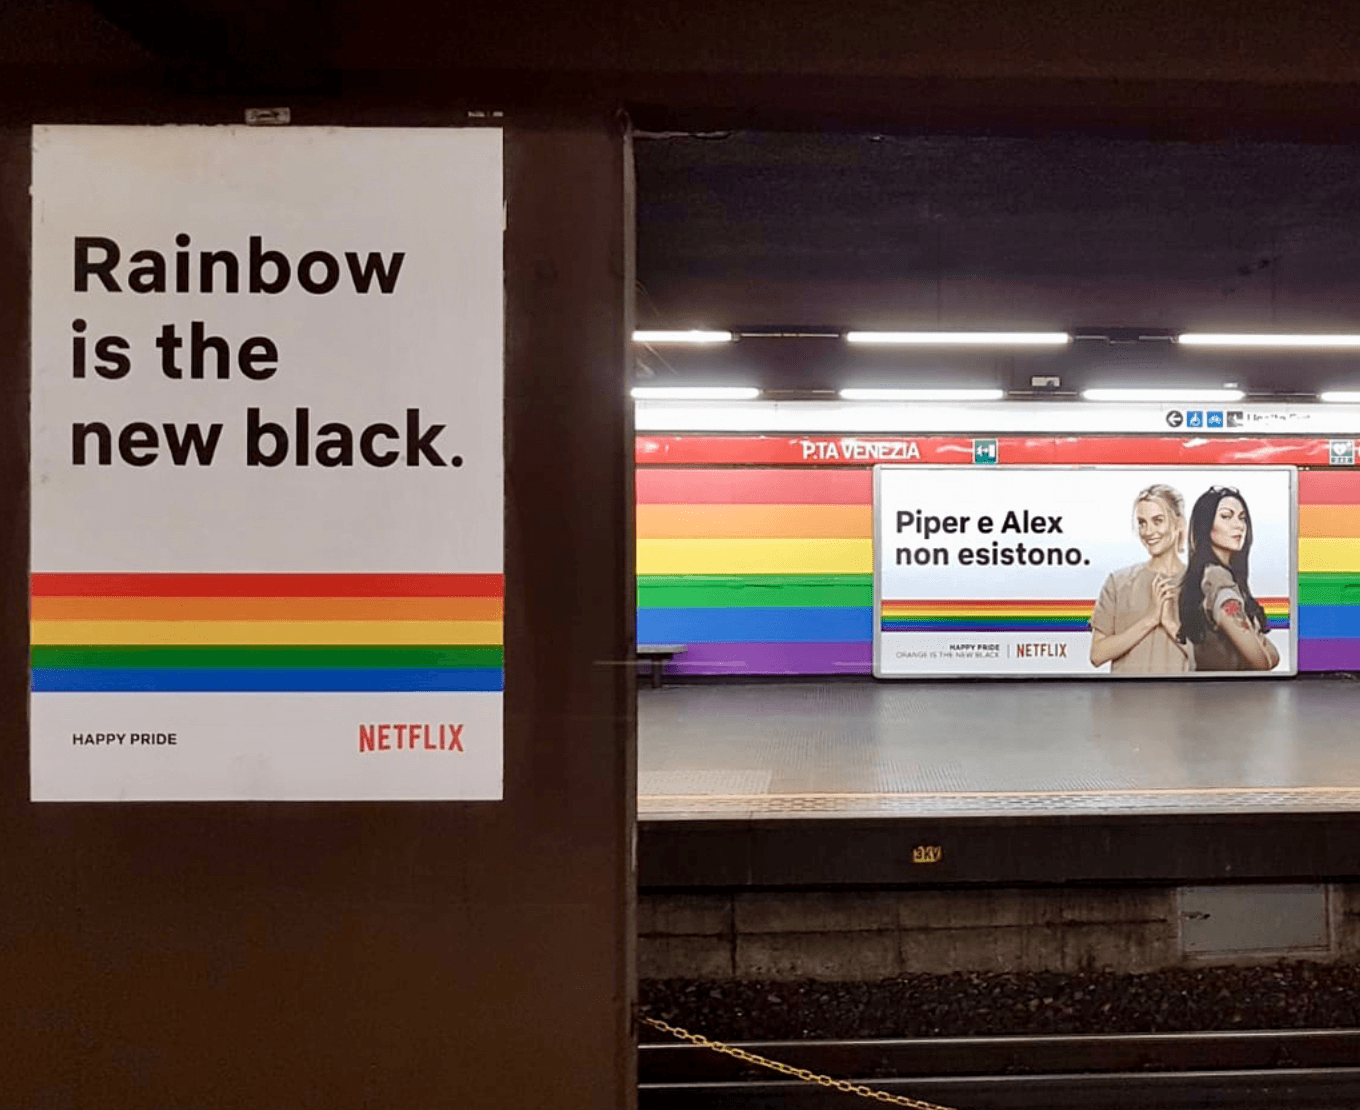 New Black Netflix Logo - Netflix and Rainbow is the new black for the Pride of Milan